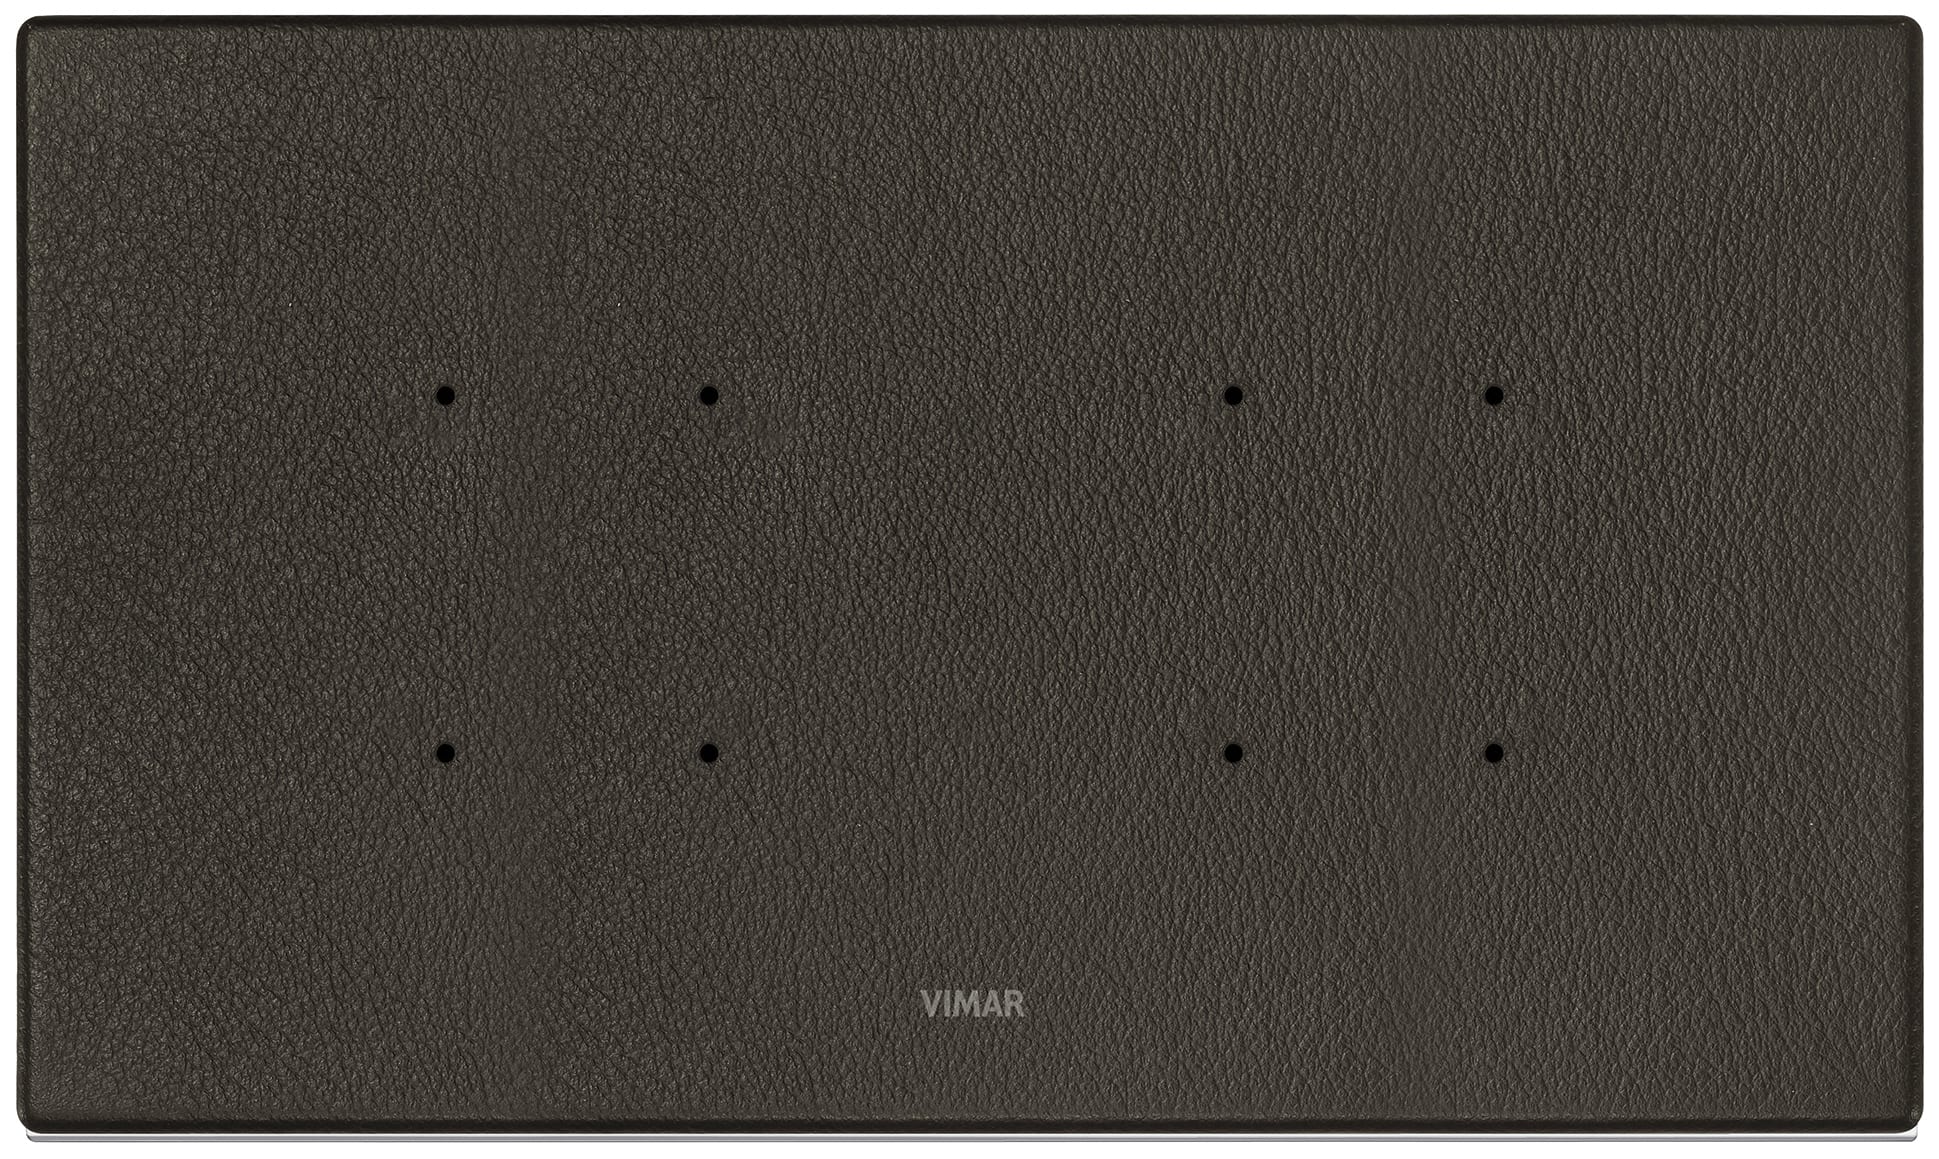 VIMAR S.P.A. - VIW21667.22 PLACCA 5MBS (2+BLANK+2) TABACCO